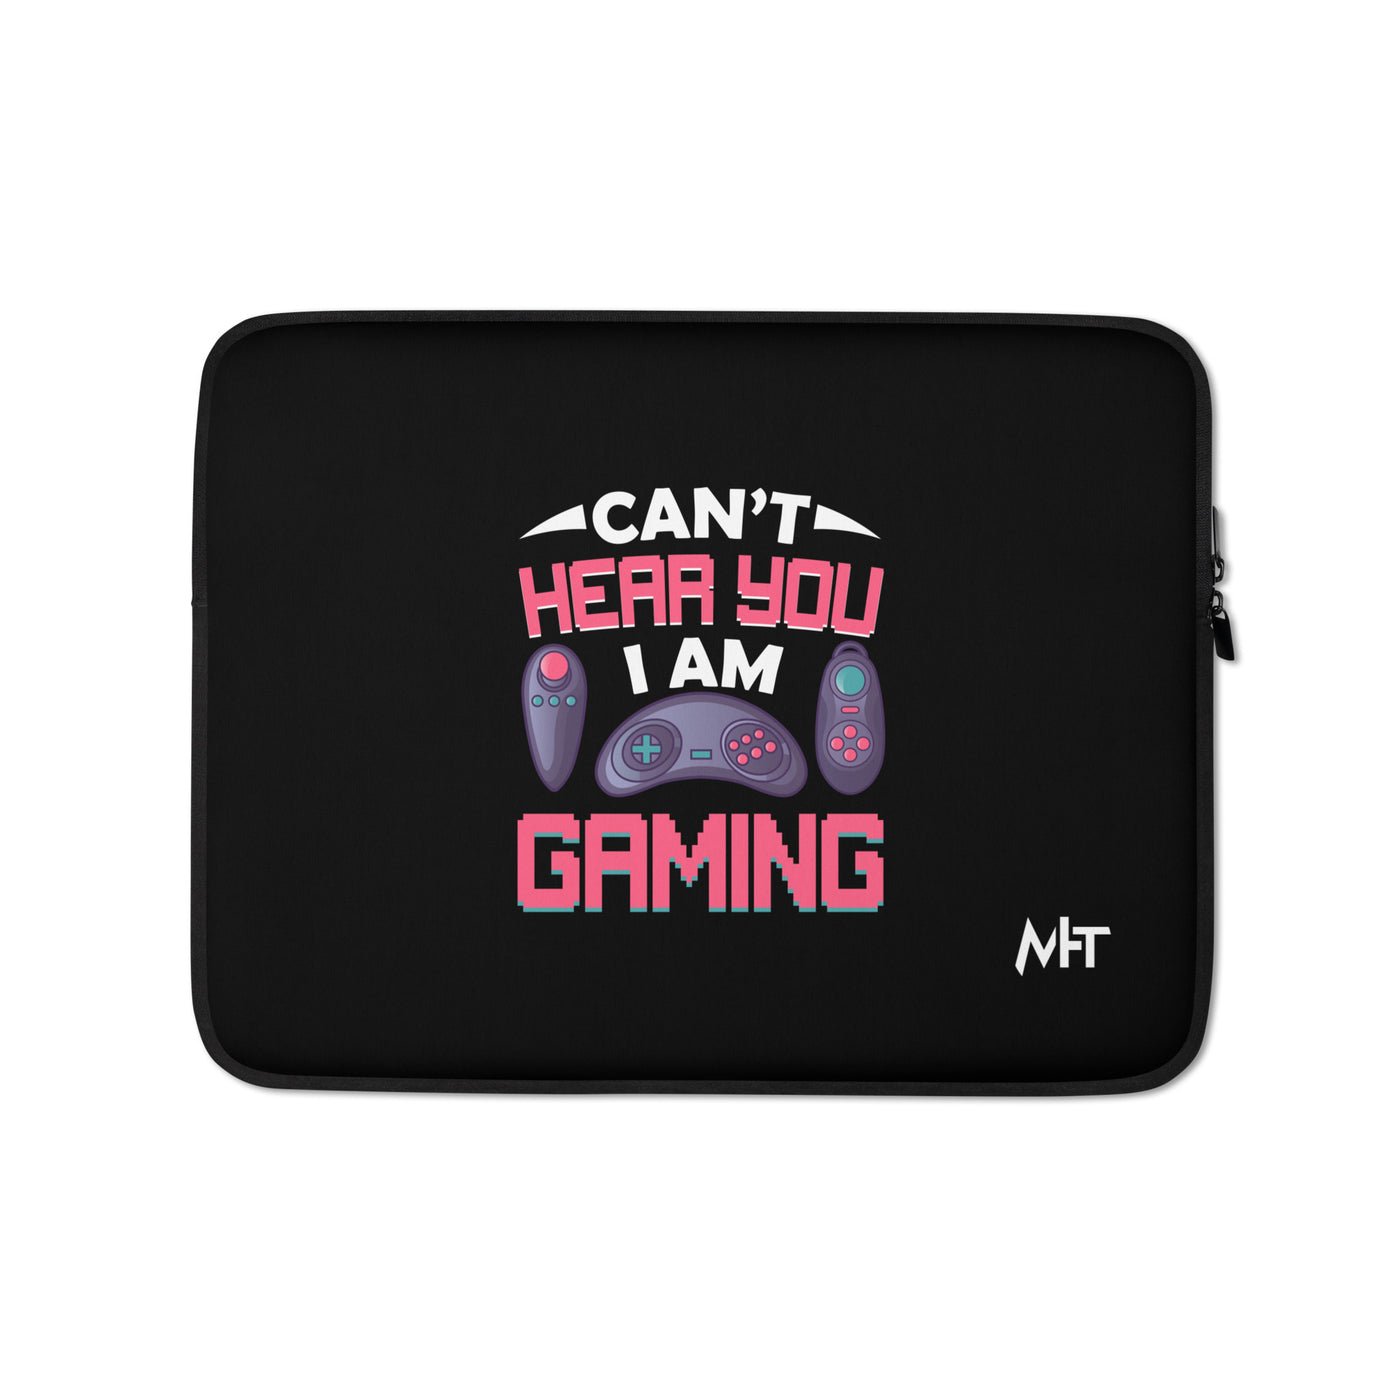 Can't Hear you, I am Gaming - Laptop Sleeve